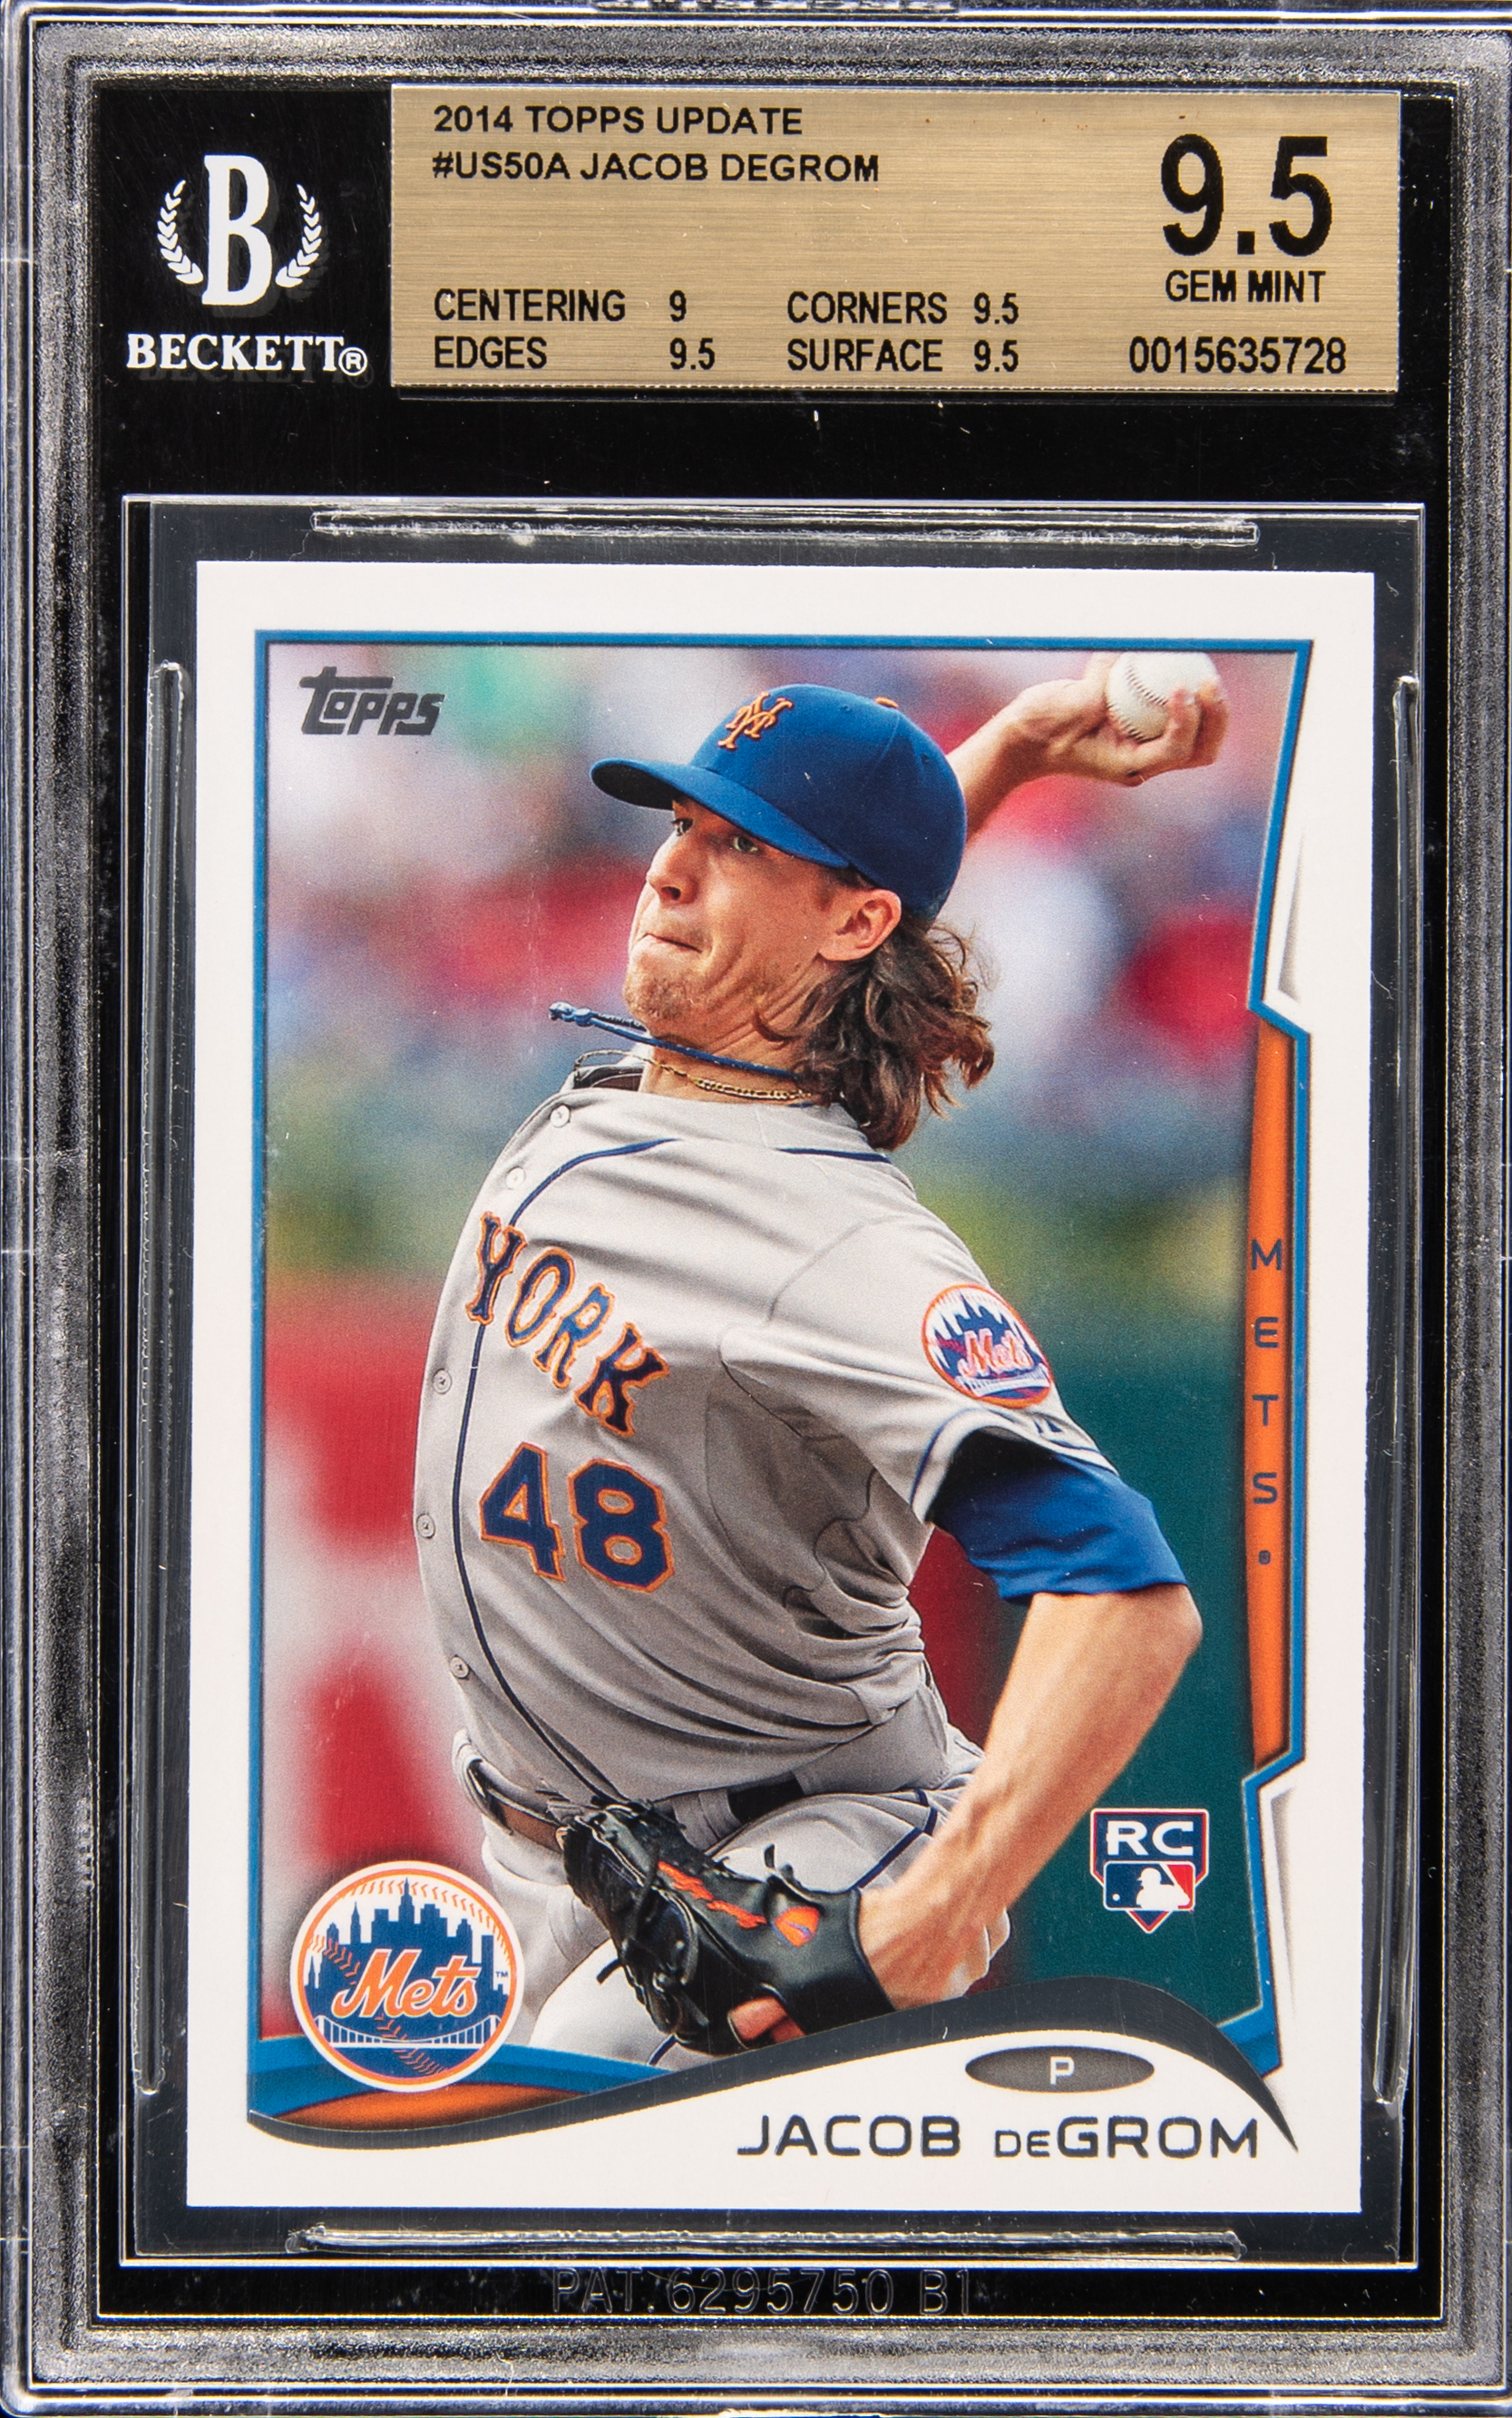 2014 Topps Update #US50 Jacob deGrom, Throwing Rookie Card – BGS GEM MINT 9.5